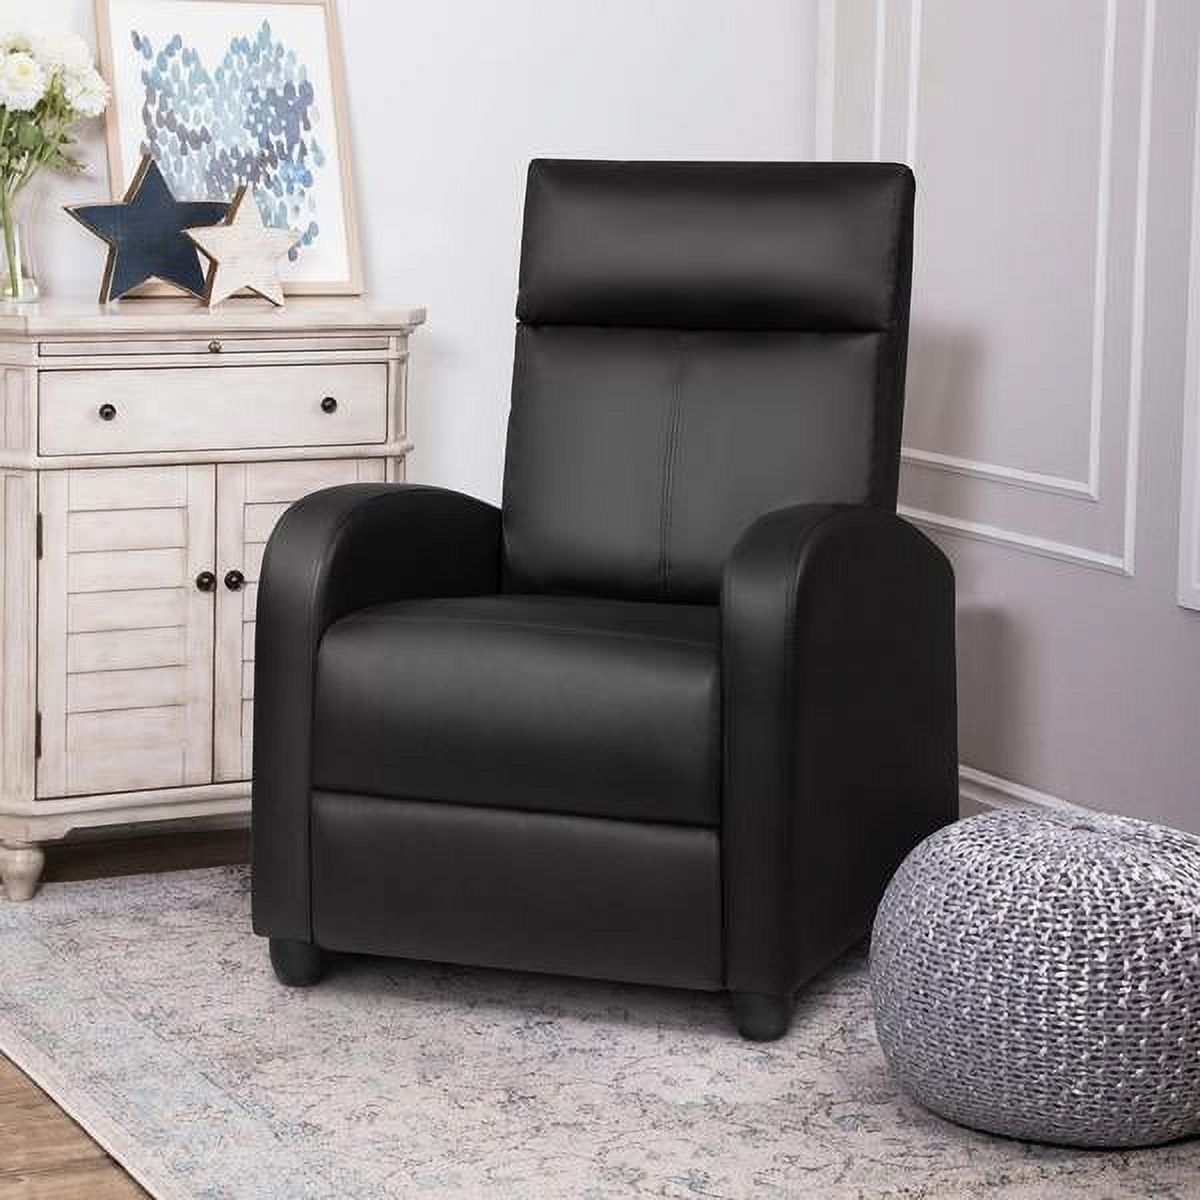 Lacoo Home Theater Recliner with Padded Seat and Backrest, Black - image 4 of 8